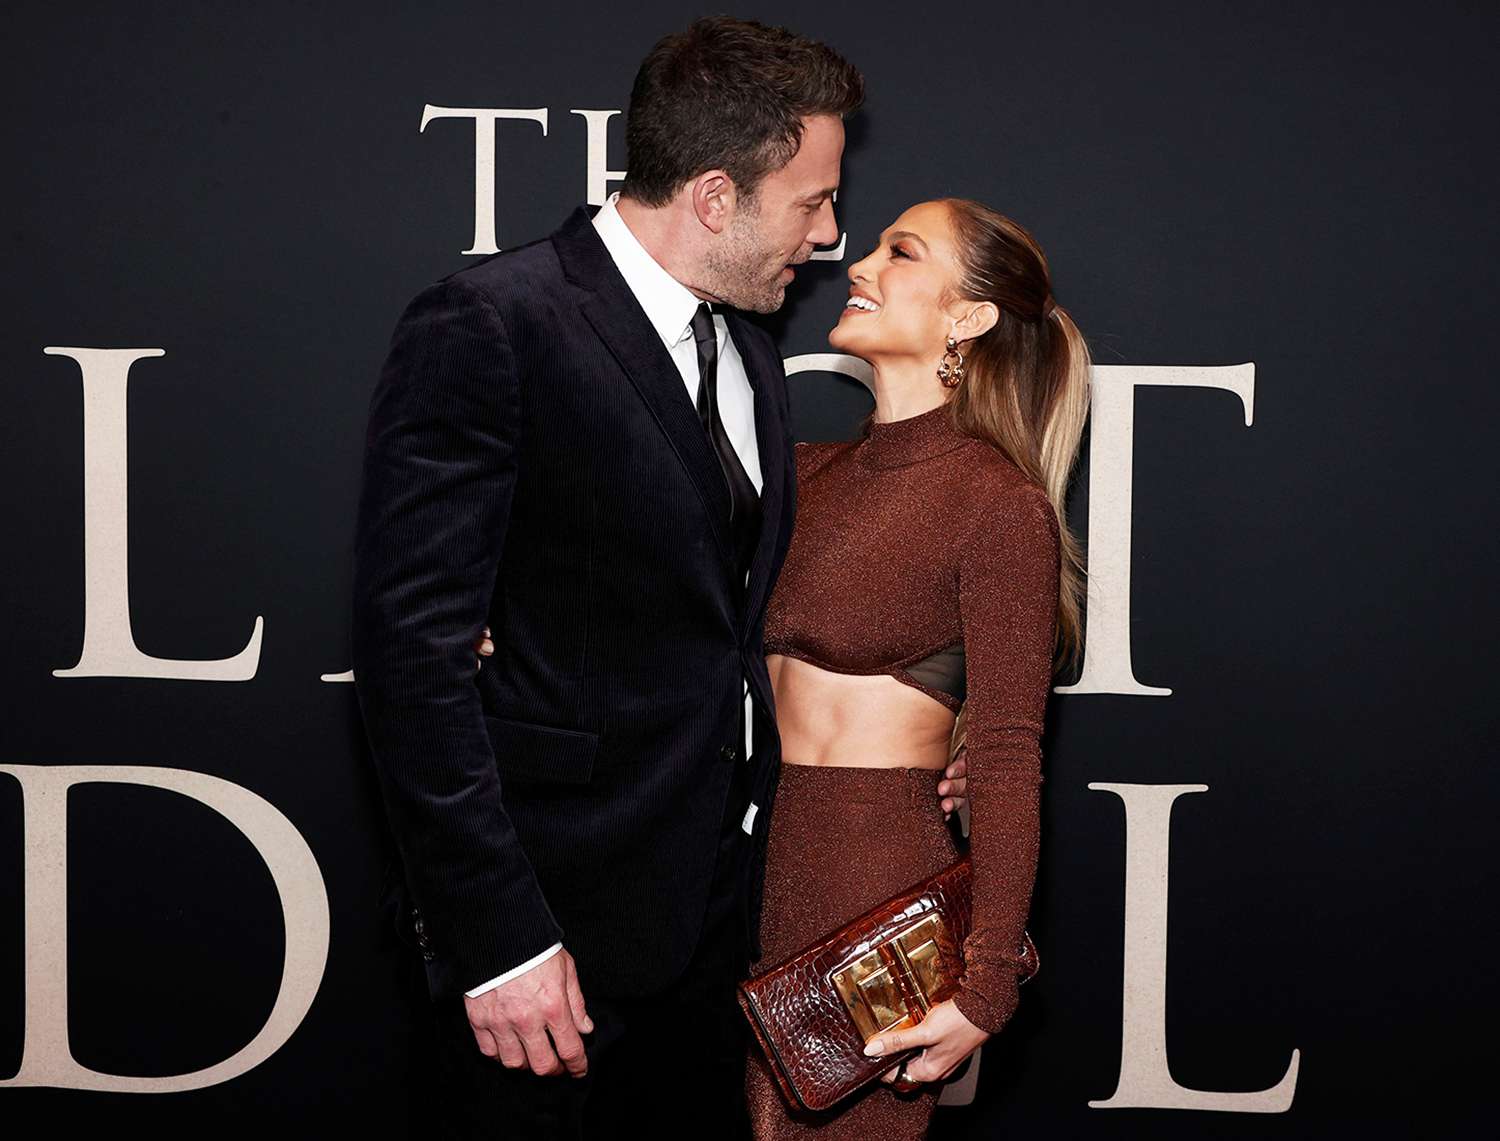 Ben Affleck and Jennifer Lopez attend "The Last Duel" New York Premiere at Rose Theater at Jazz at Lincoln Center's Frederick P. Rose Hall on October 09, 2021 in New York City.